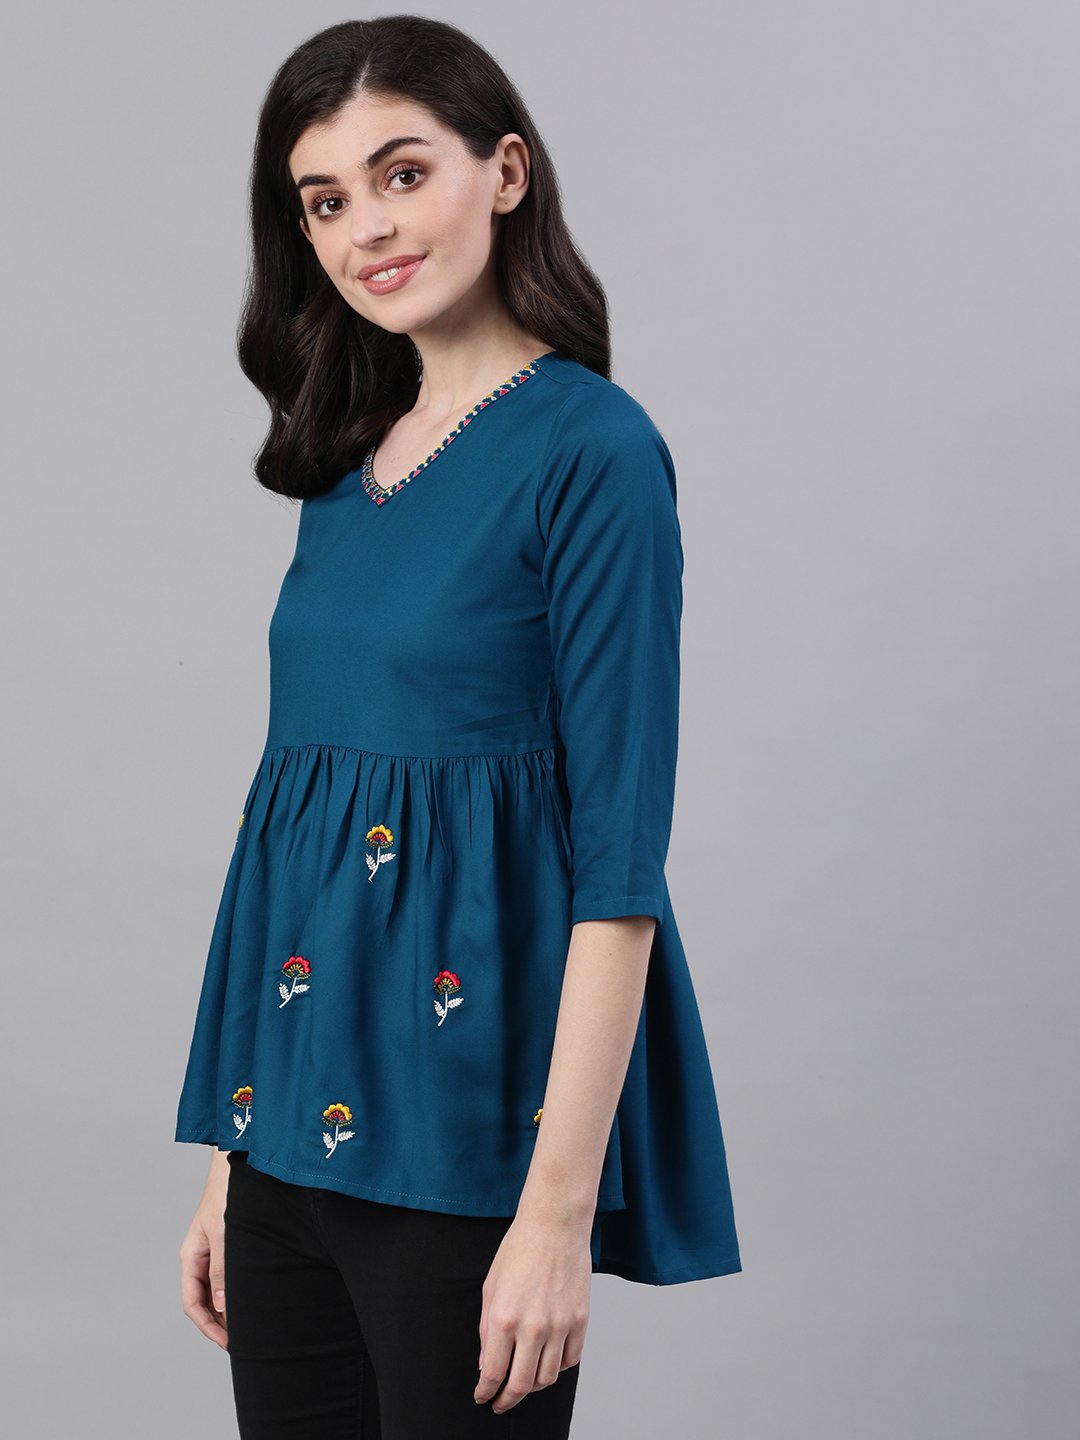 Women's Teal Blue Three-Quarter Sleeves Gathered Or Pleated Top - Nayo Clothing